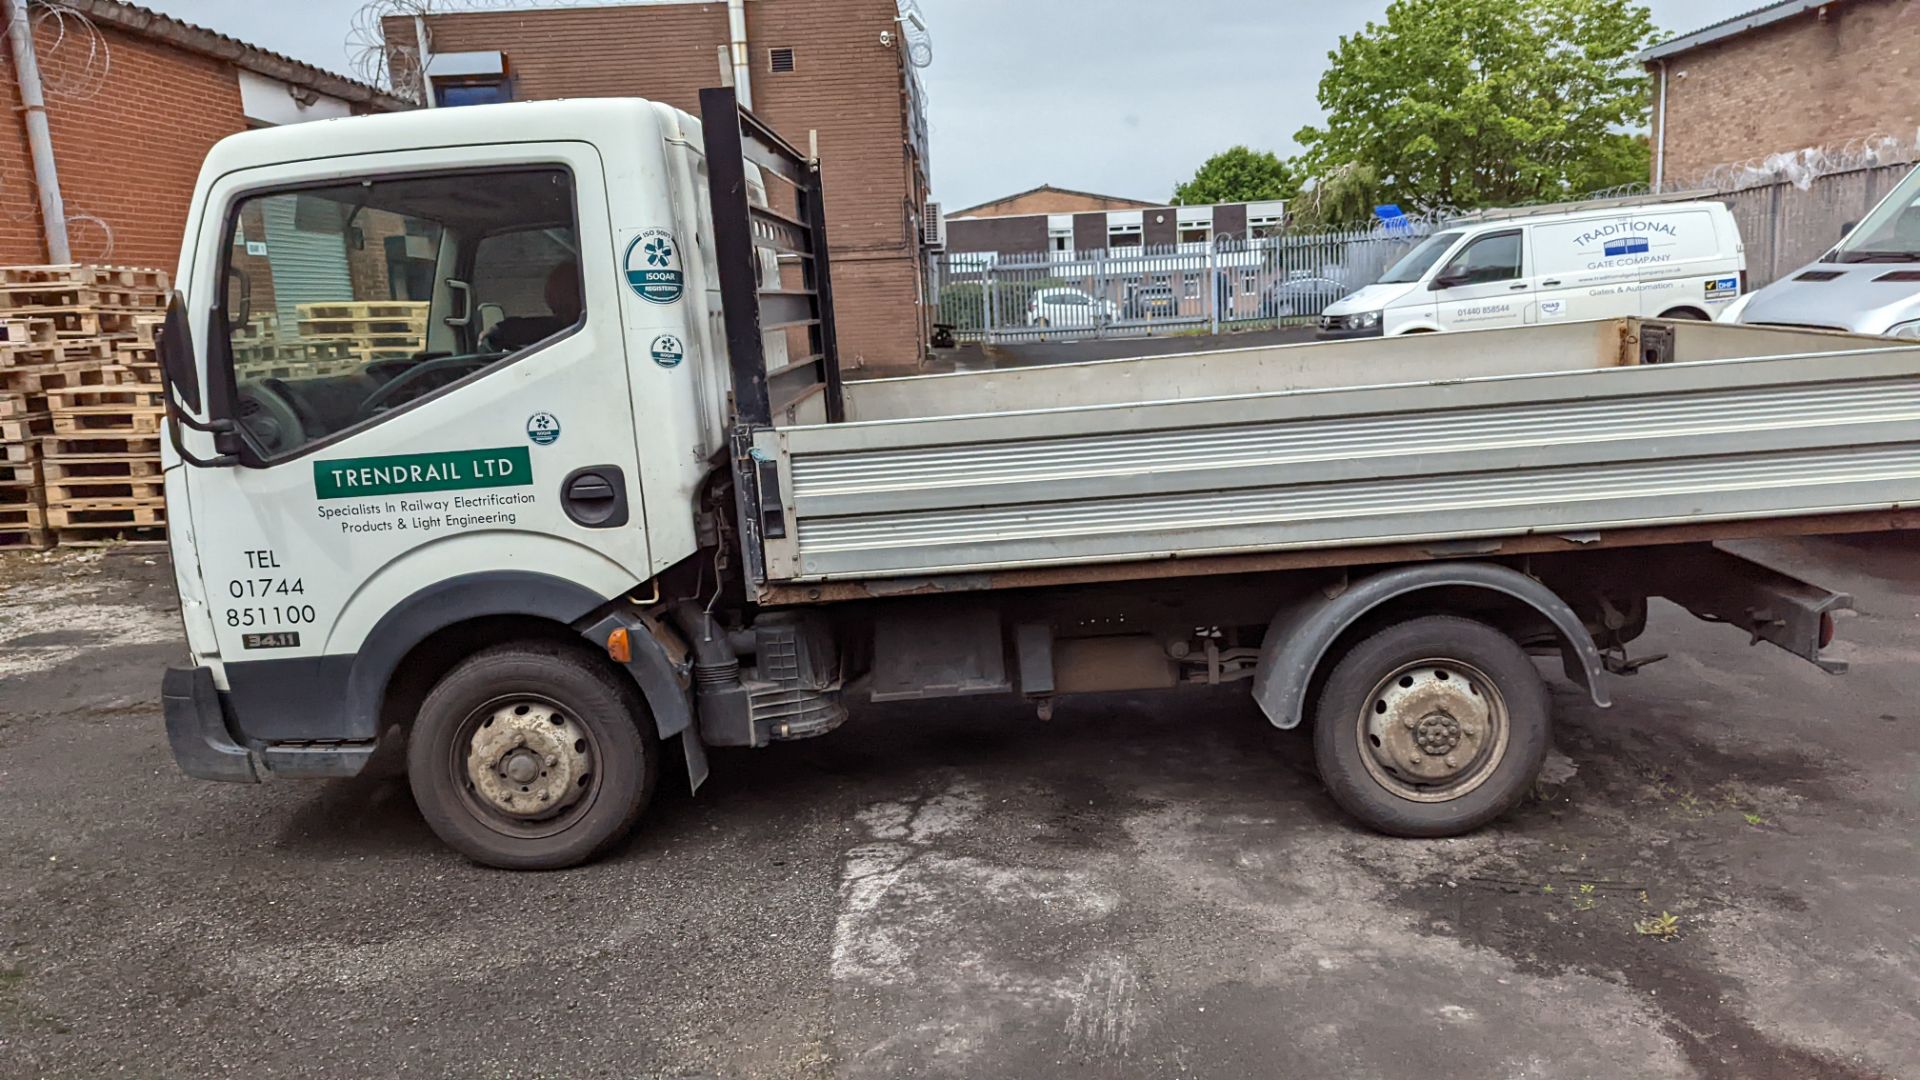 FE57 UVK Nissan Cabstar 34.11 S/C SWB 3.1m dropside, 5 speed manual gearbox, 2488cc diesel engine. - Image 11 of 35